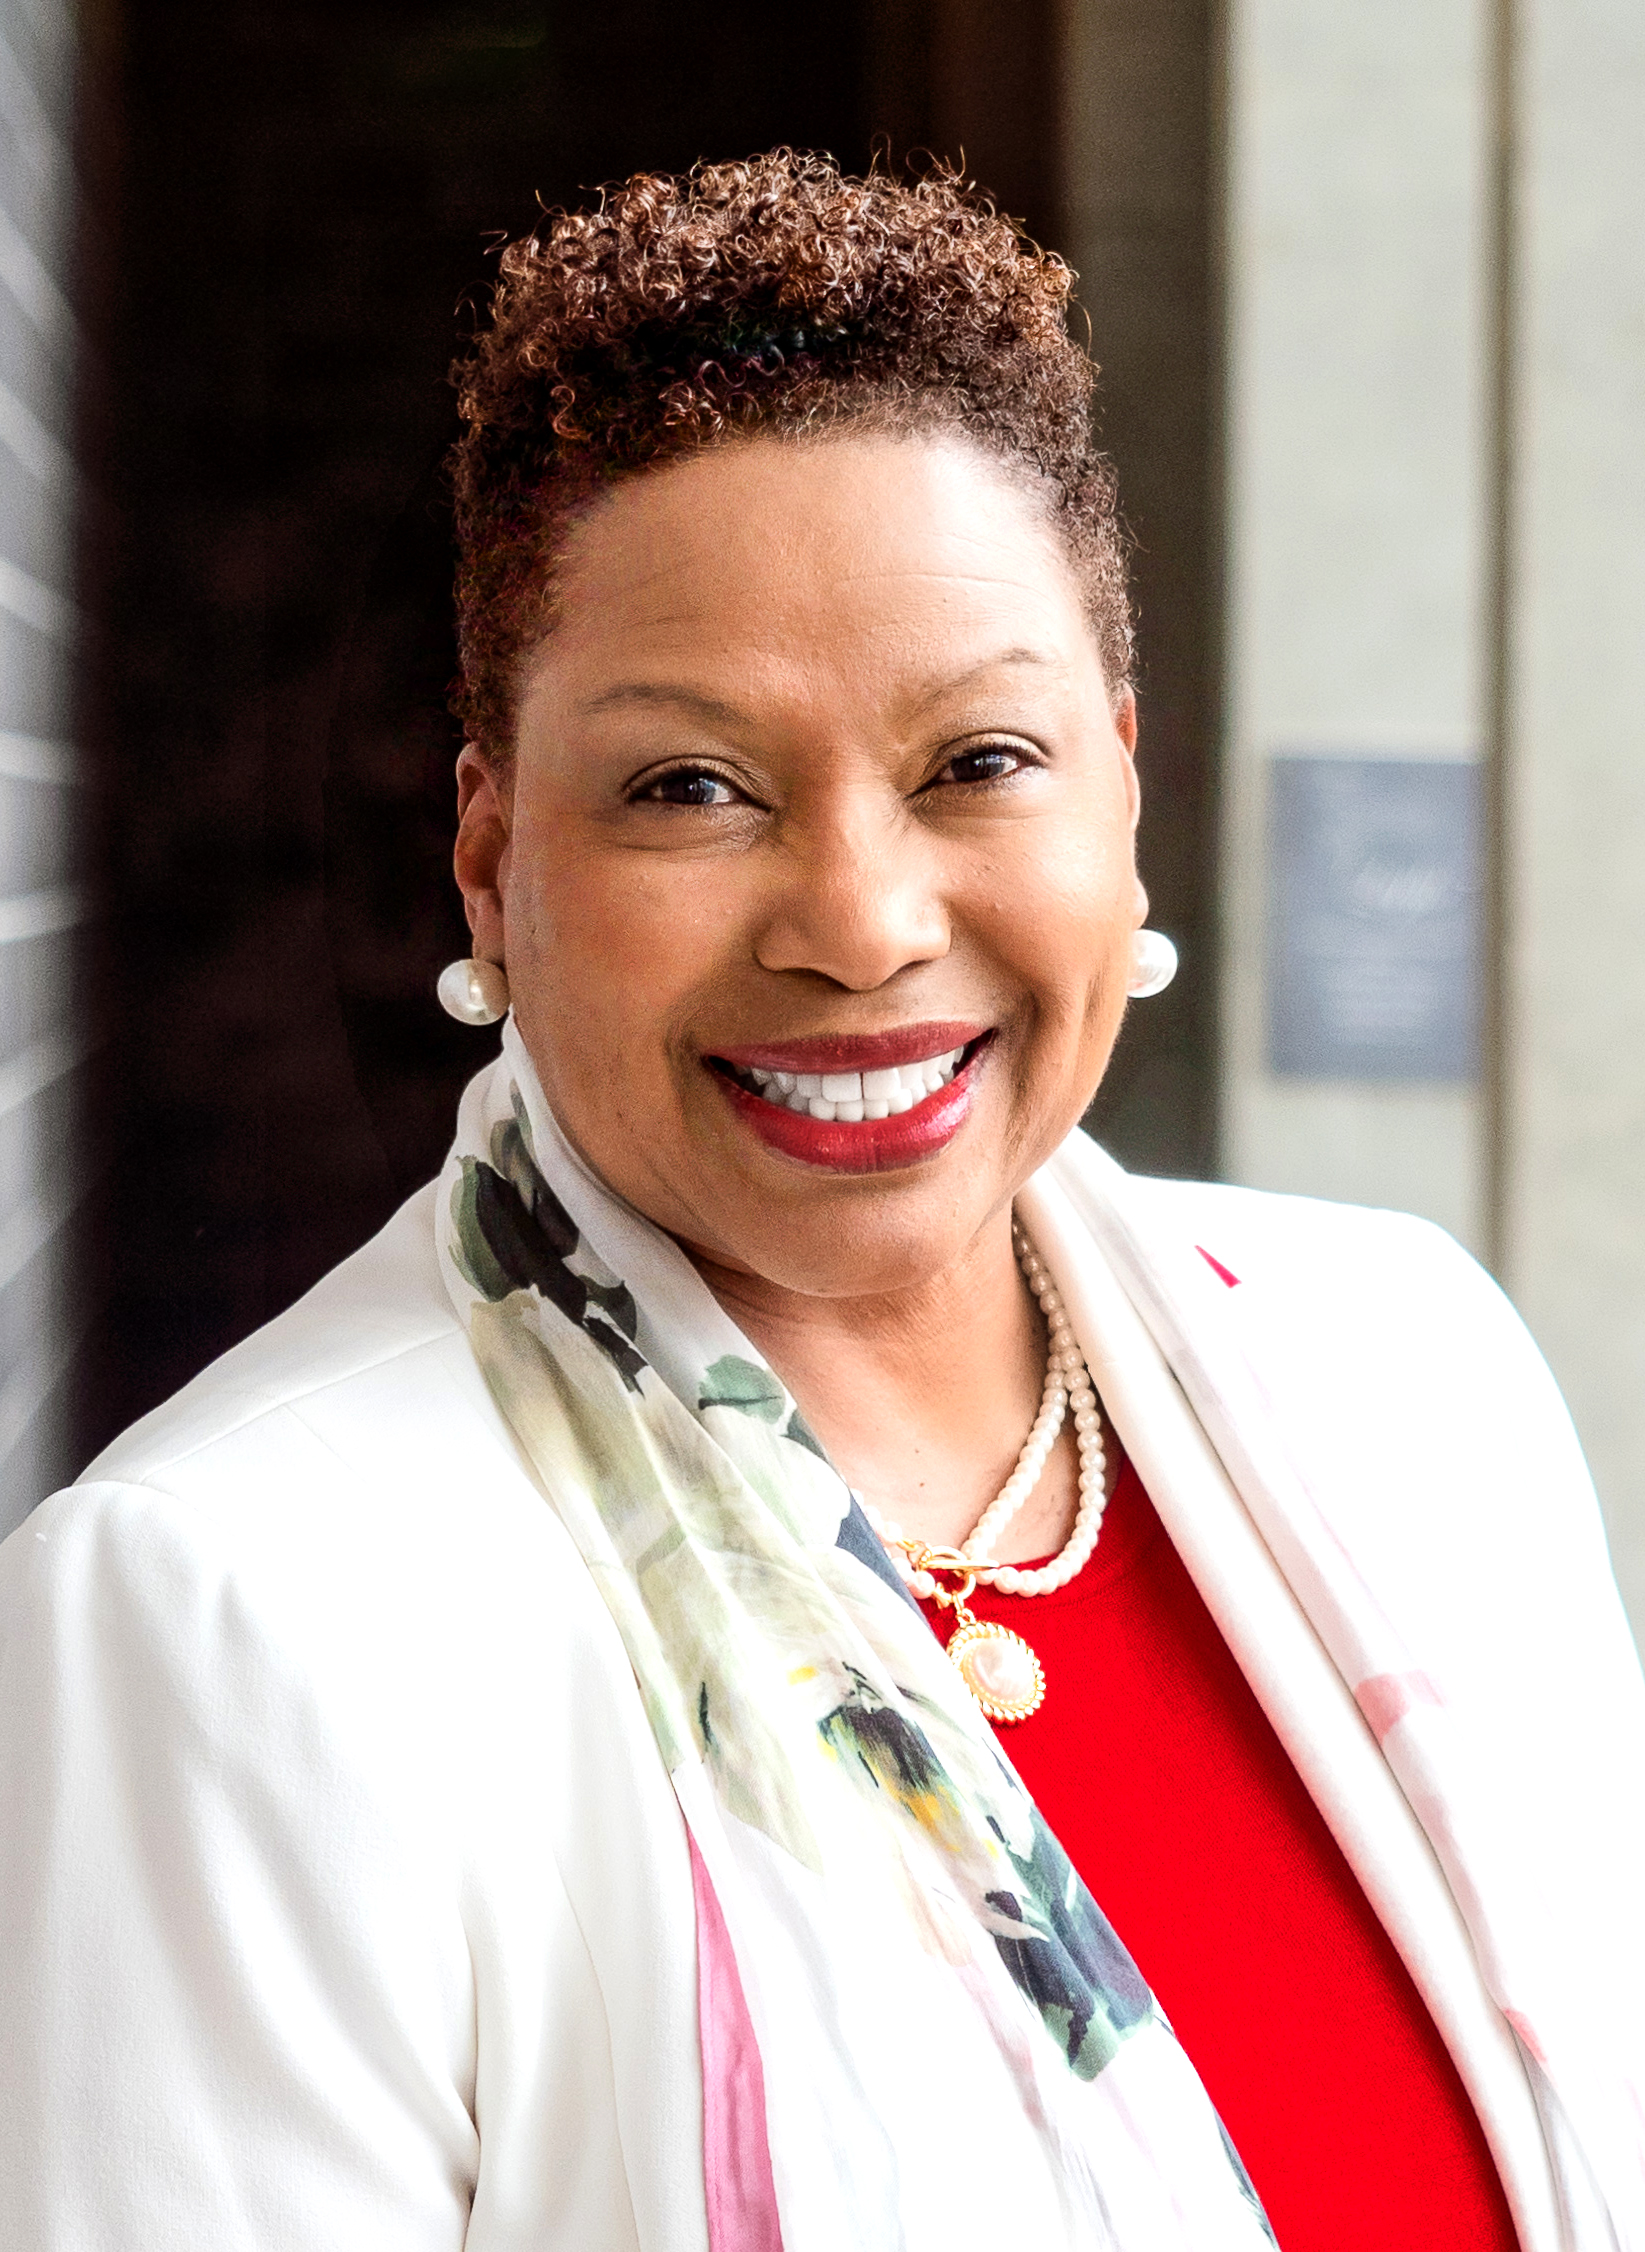 Dr. Carmen J. Walters, President of Tougaloo College